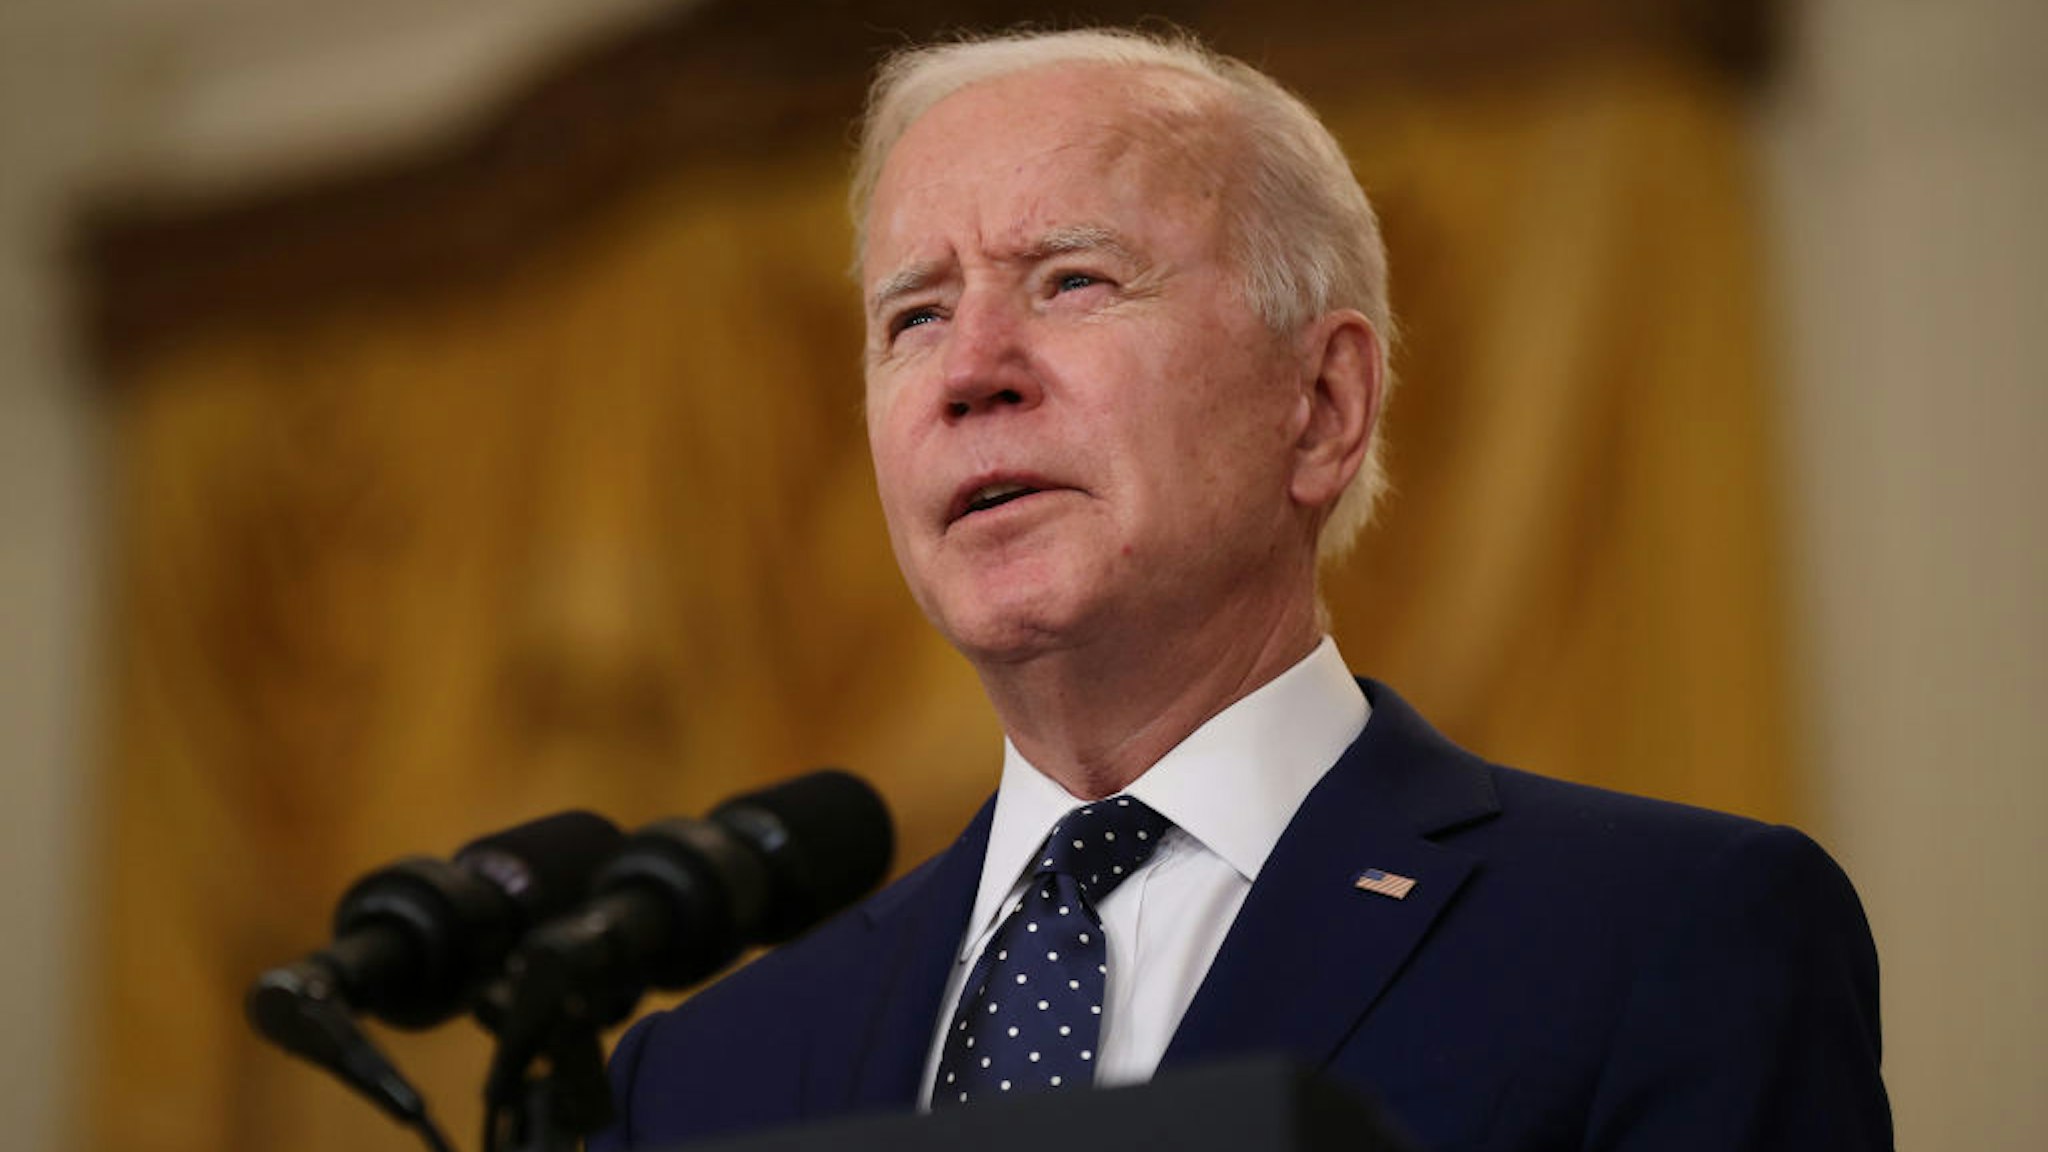 U.S. President Joe Biden announces new economic sanctions against the Russia government from the East Room of the White House on April 15, 2021 in Washington, DC.